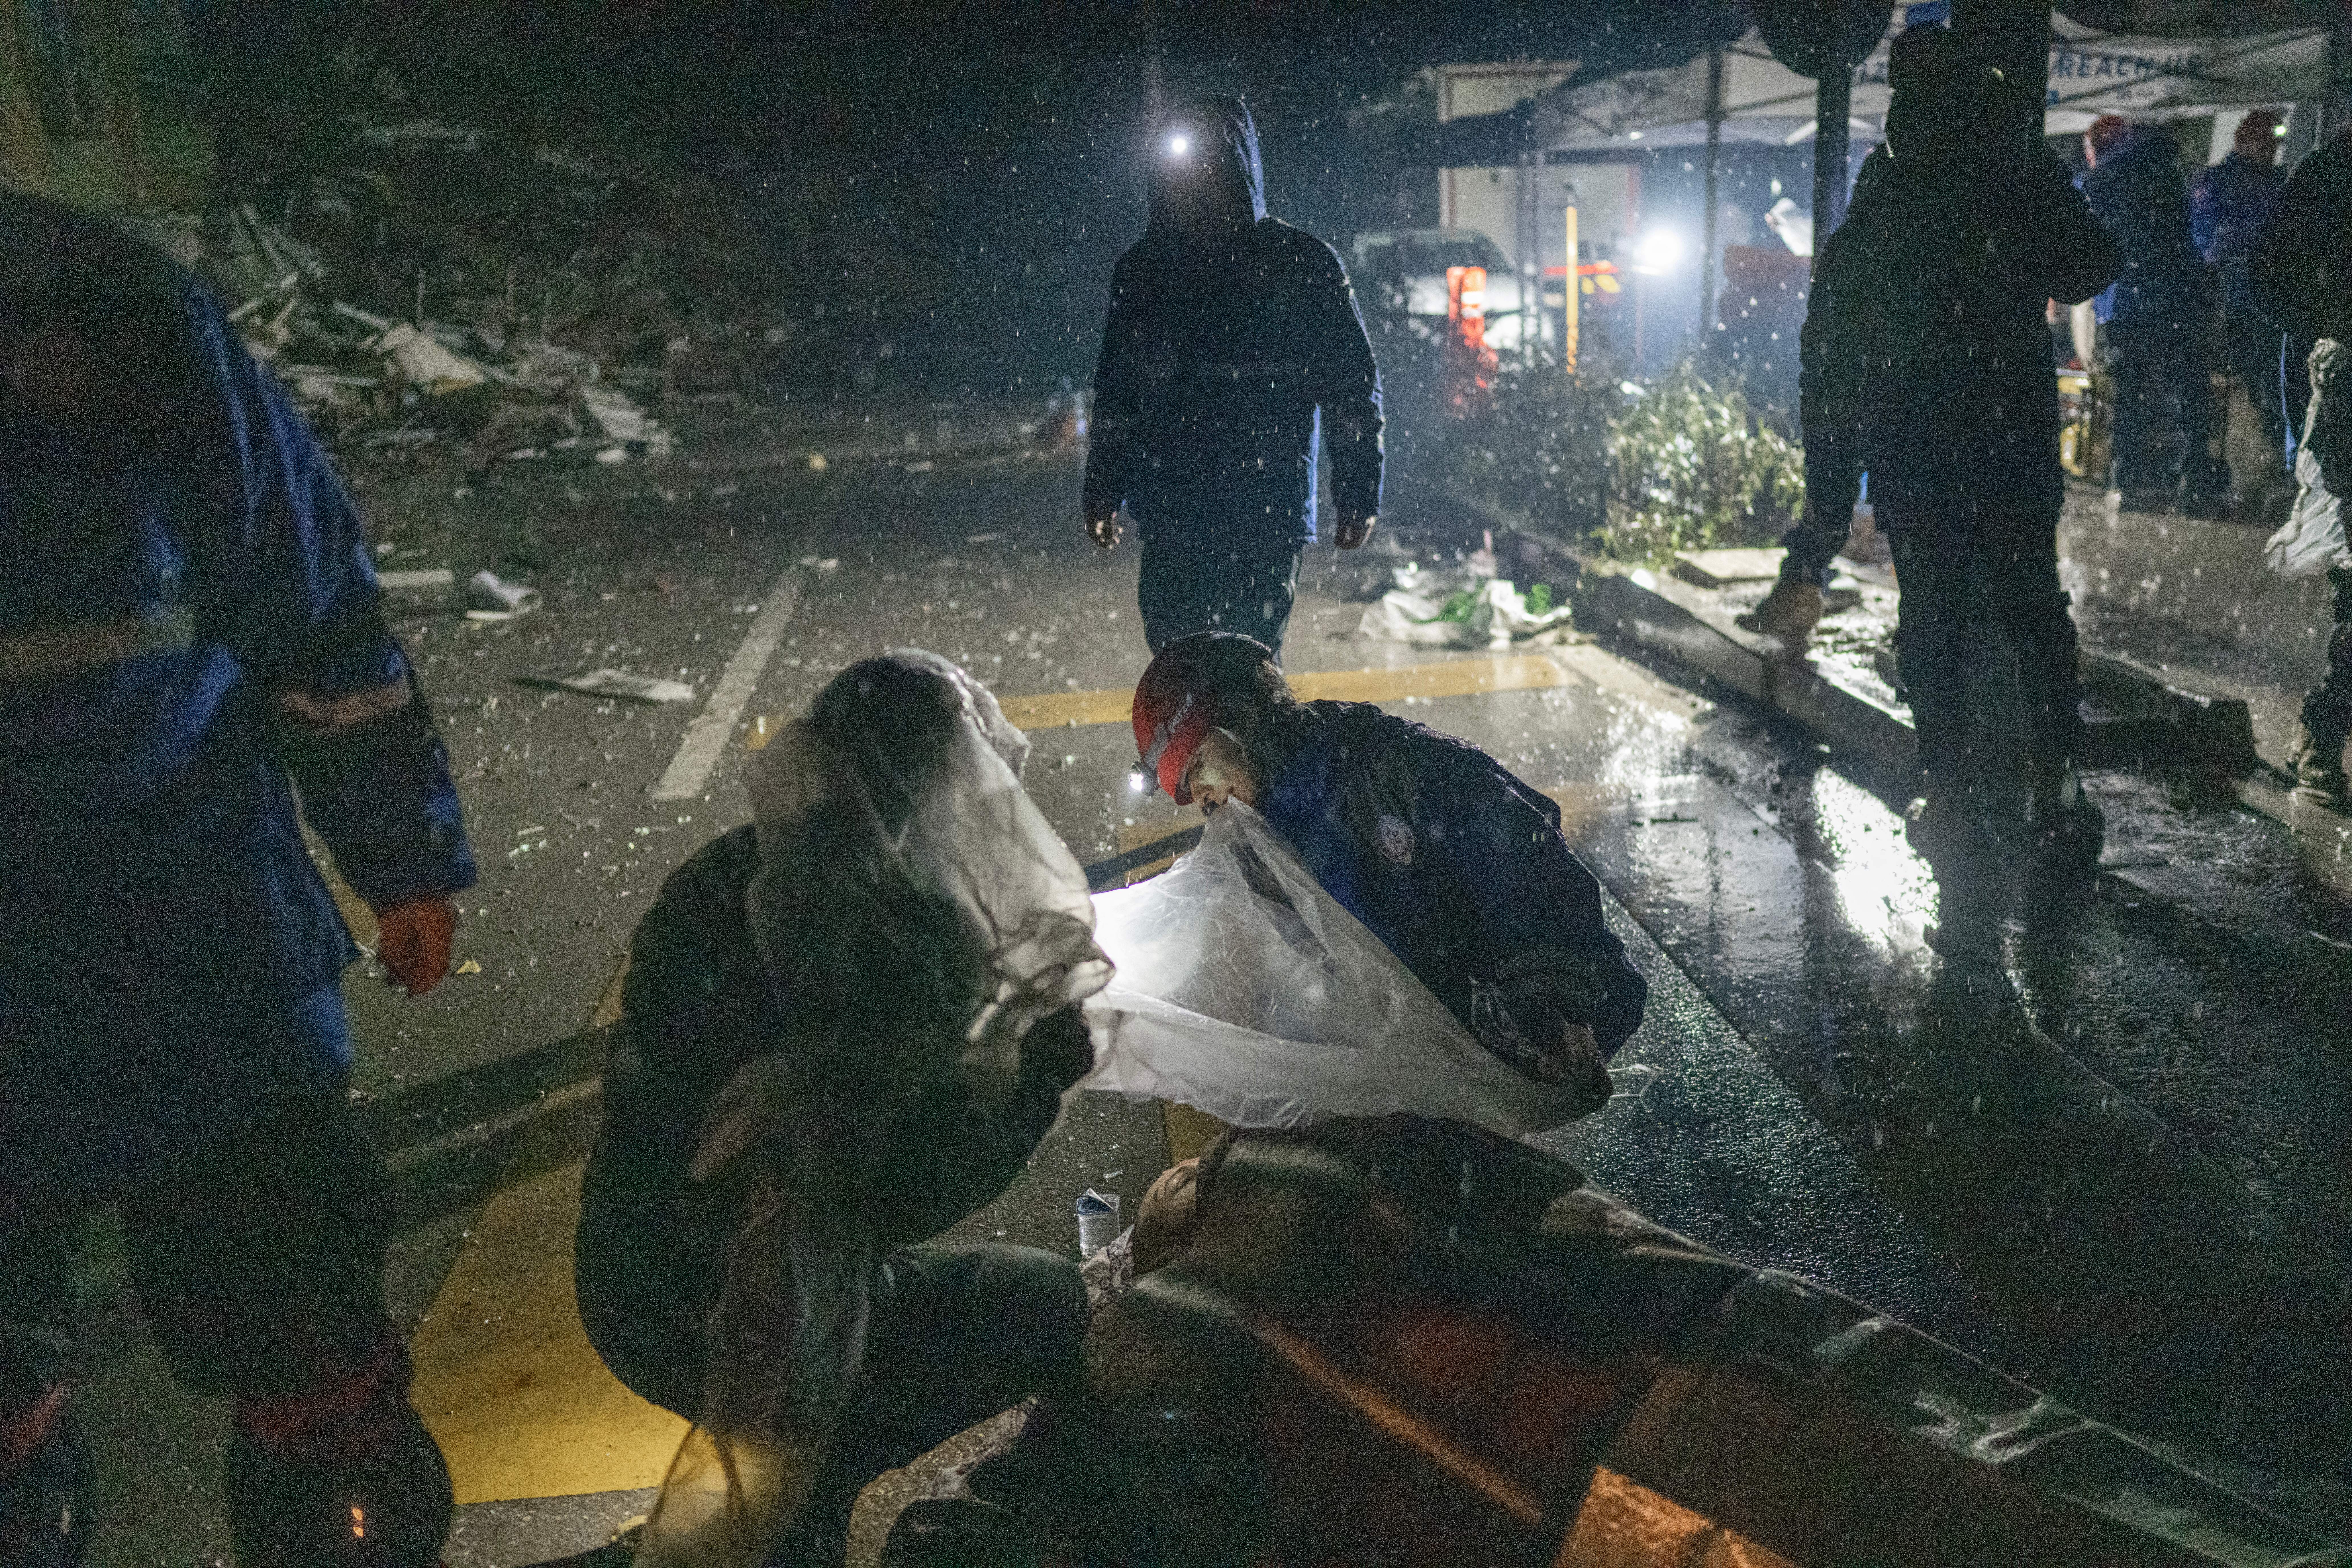 The Department of Health (DOH) on Tuesday said it deployed 31 health emergency responders to Turkey, following the magnitude 7.8 that struck the country, along with Syria.